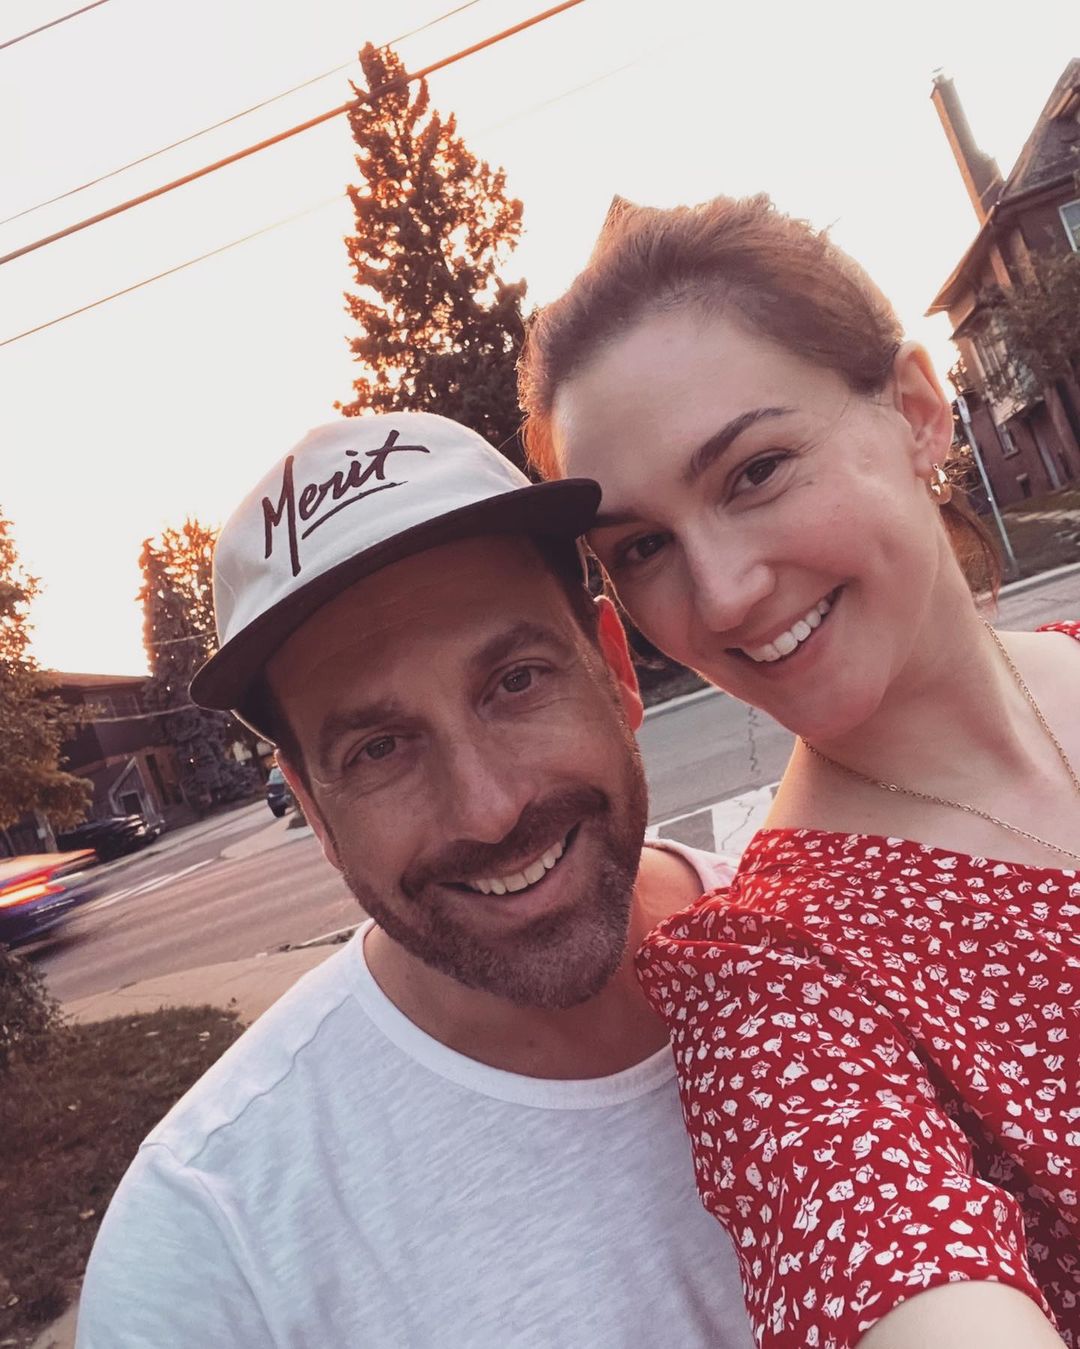 Katherine Barrell and Ray Galletti have been happily married for over five years.